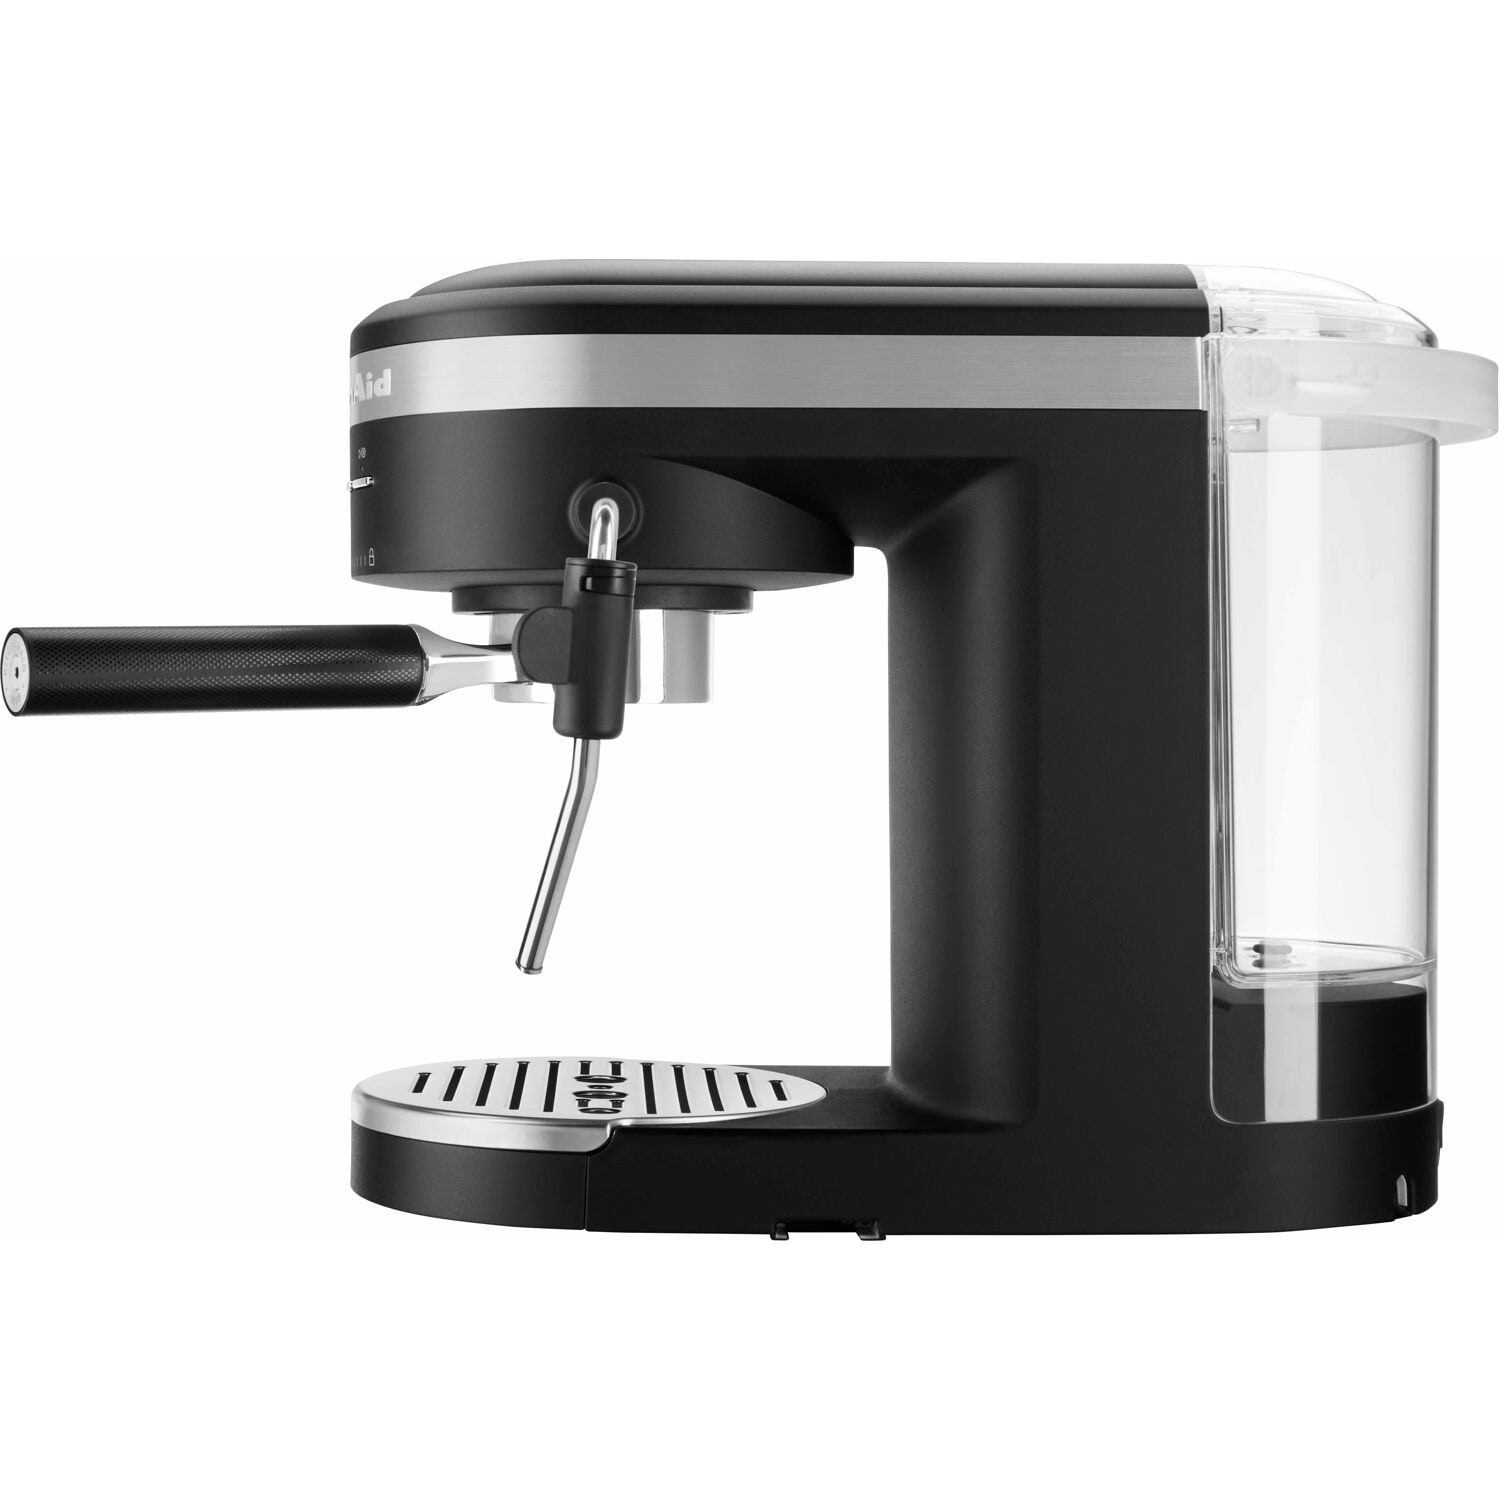 https://ak1.ostkcdn.com/images/products/is/images/direct/0b07537b8e669e6cff7c14be8b2ea67b3dd695b8/KitchenAid-Semi-Automatic-Espresso-Machine-in-Black-Matte.jpg